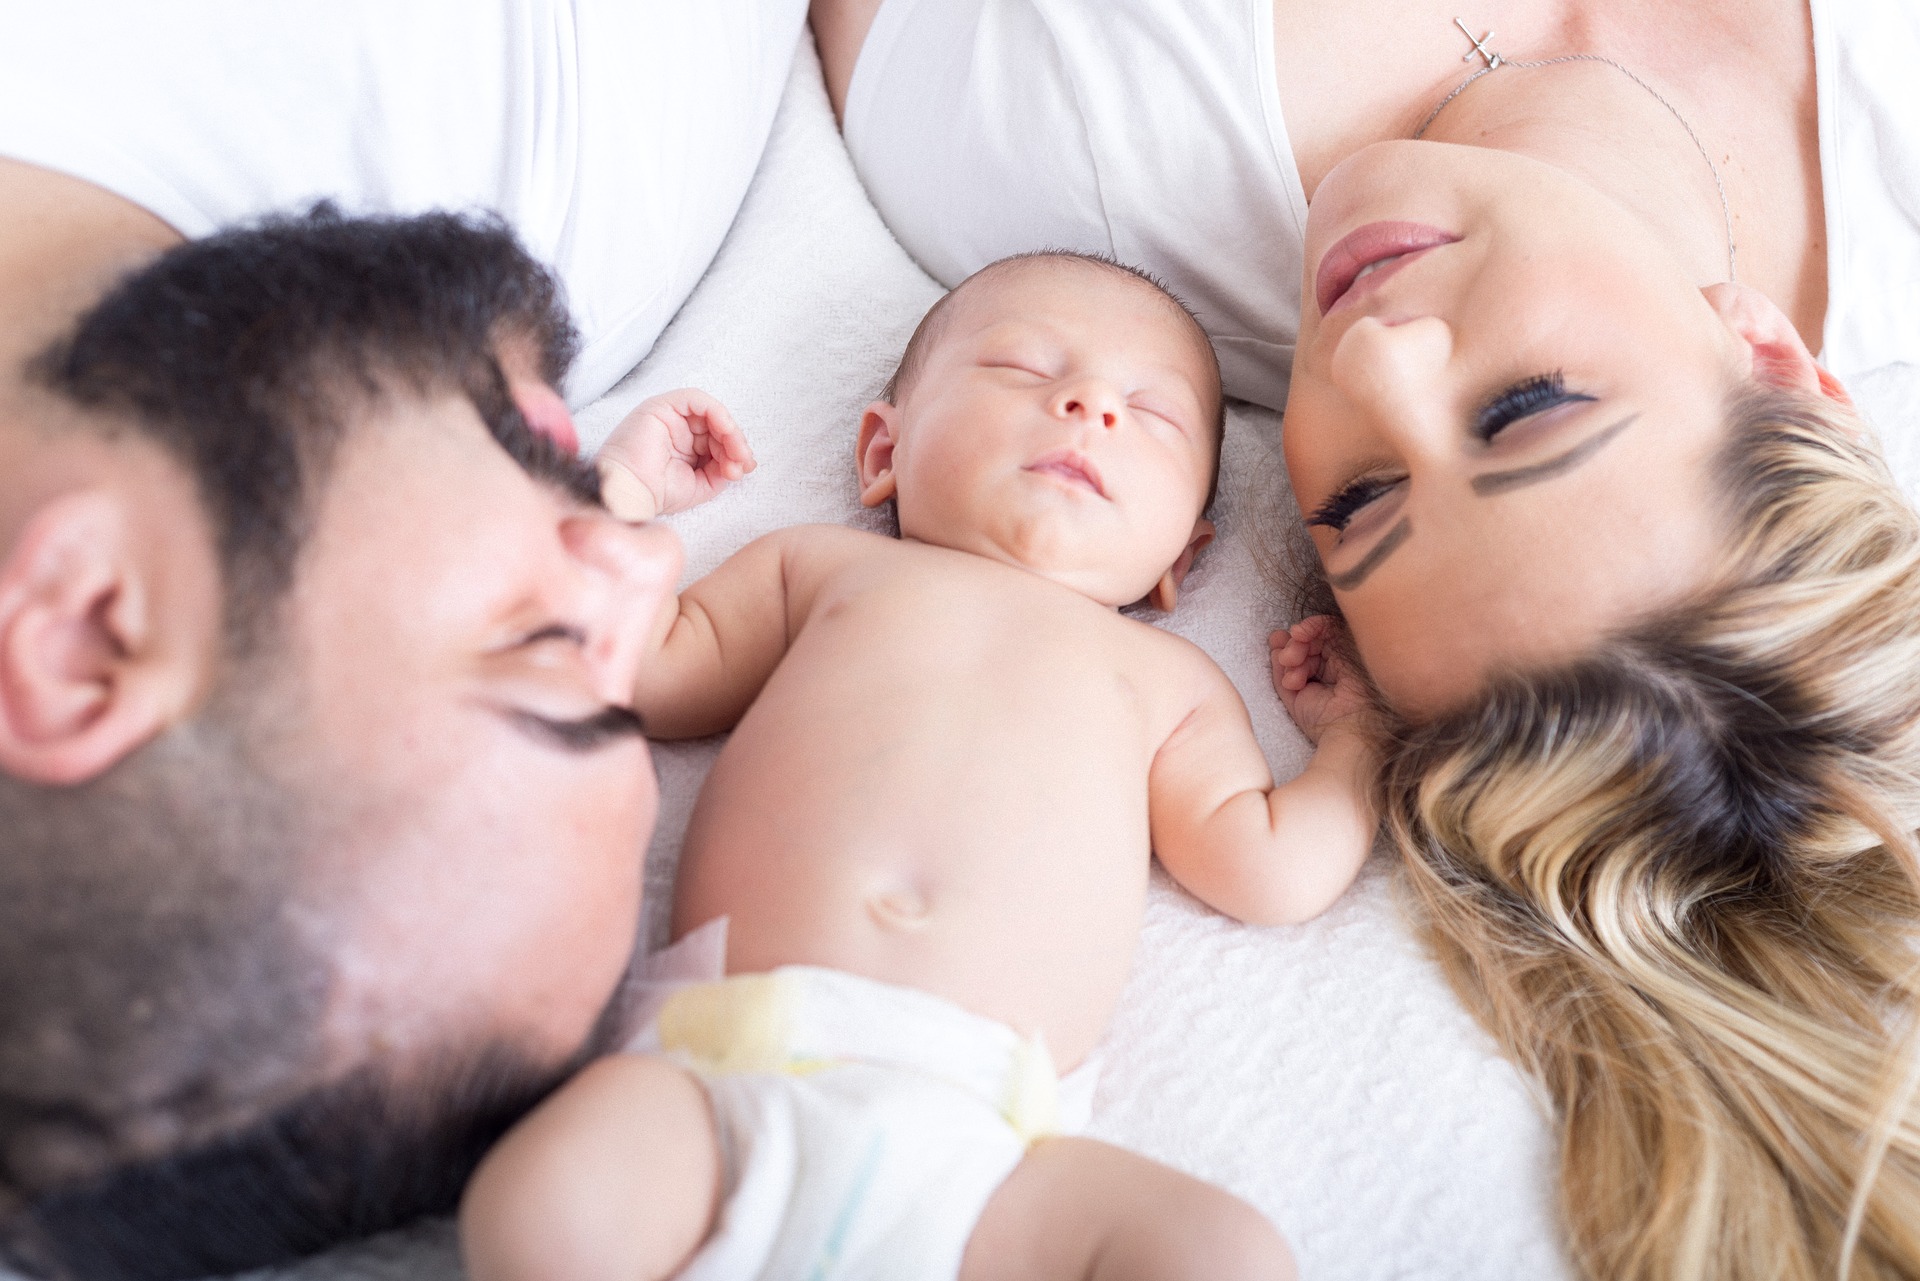 Blonde mother and father with a beard looking at a diapered sleeping baby